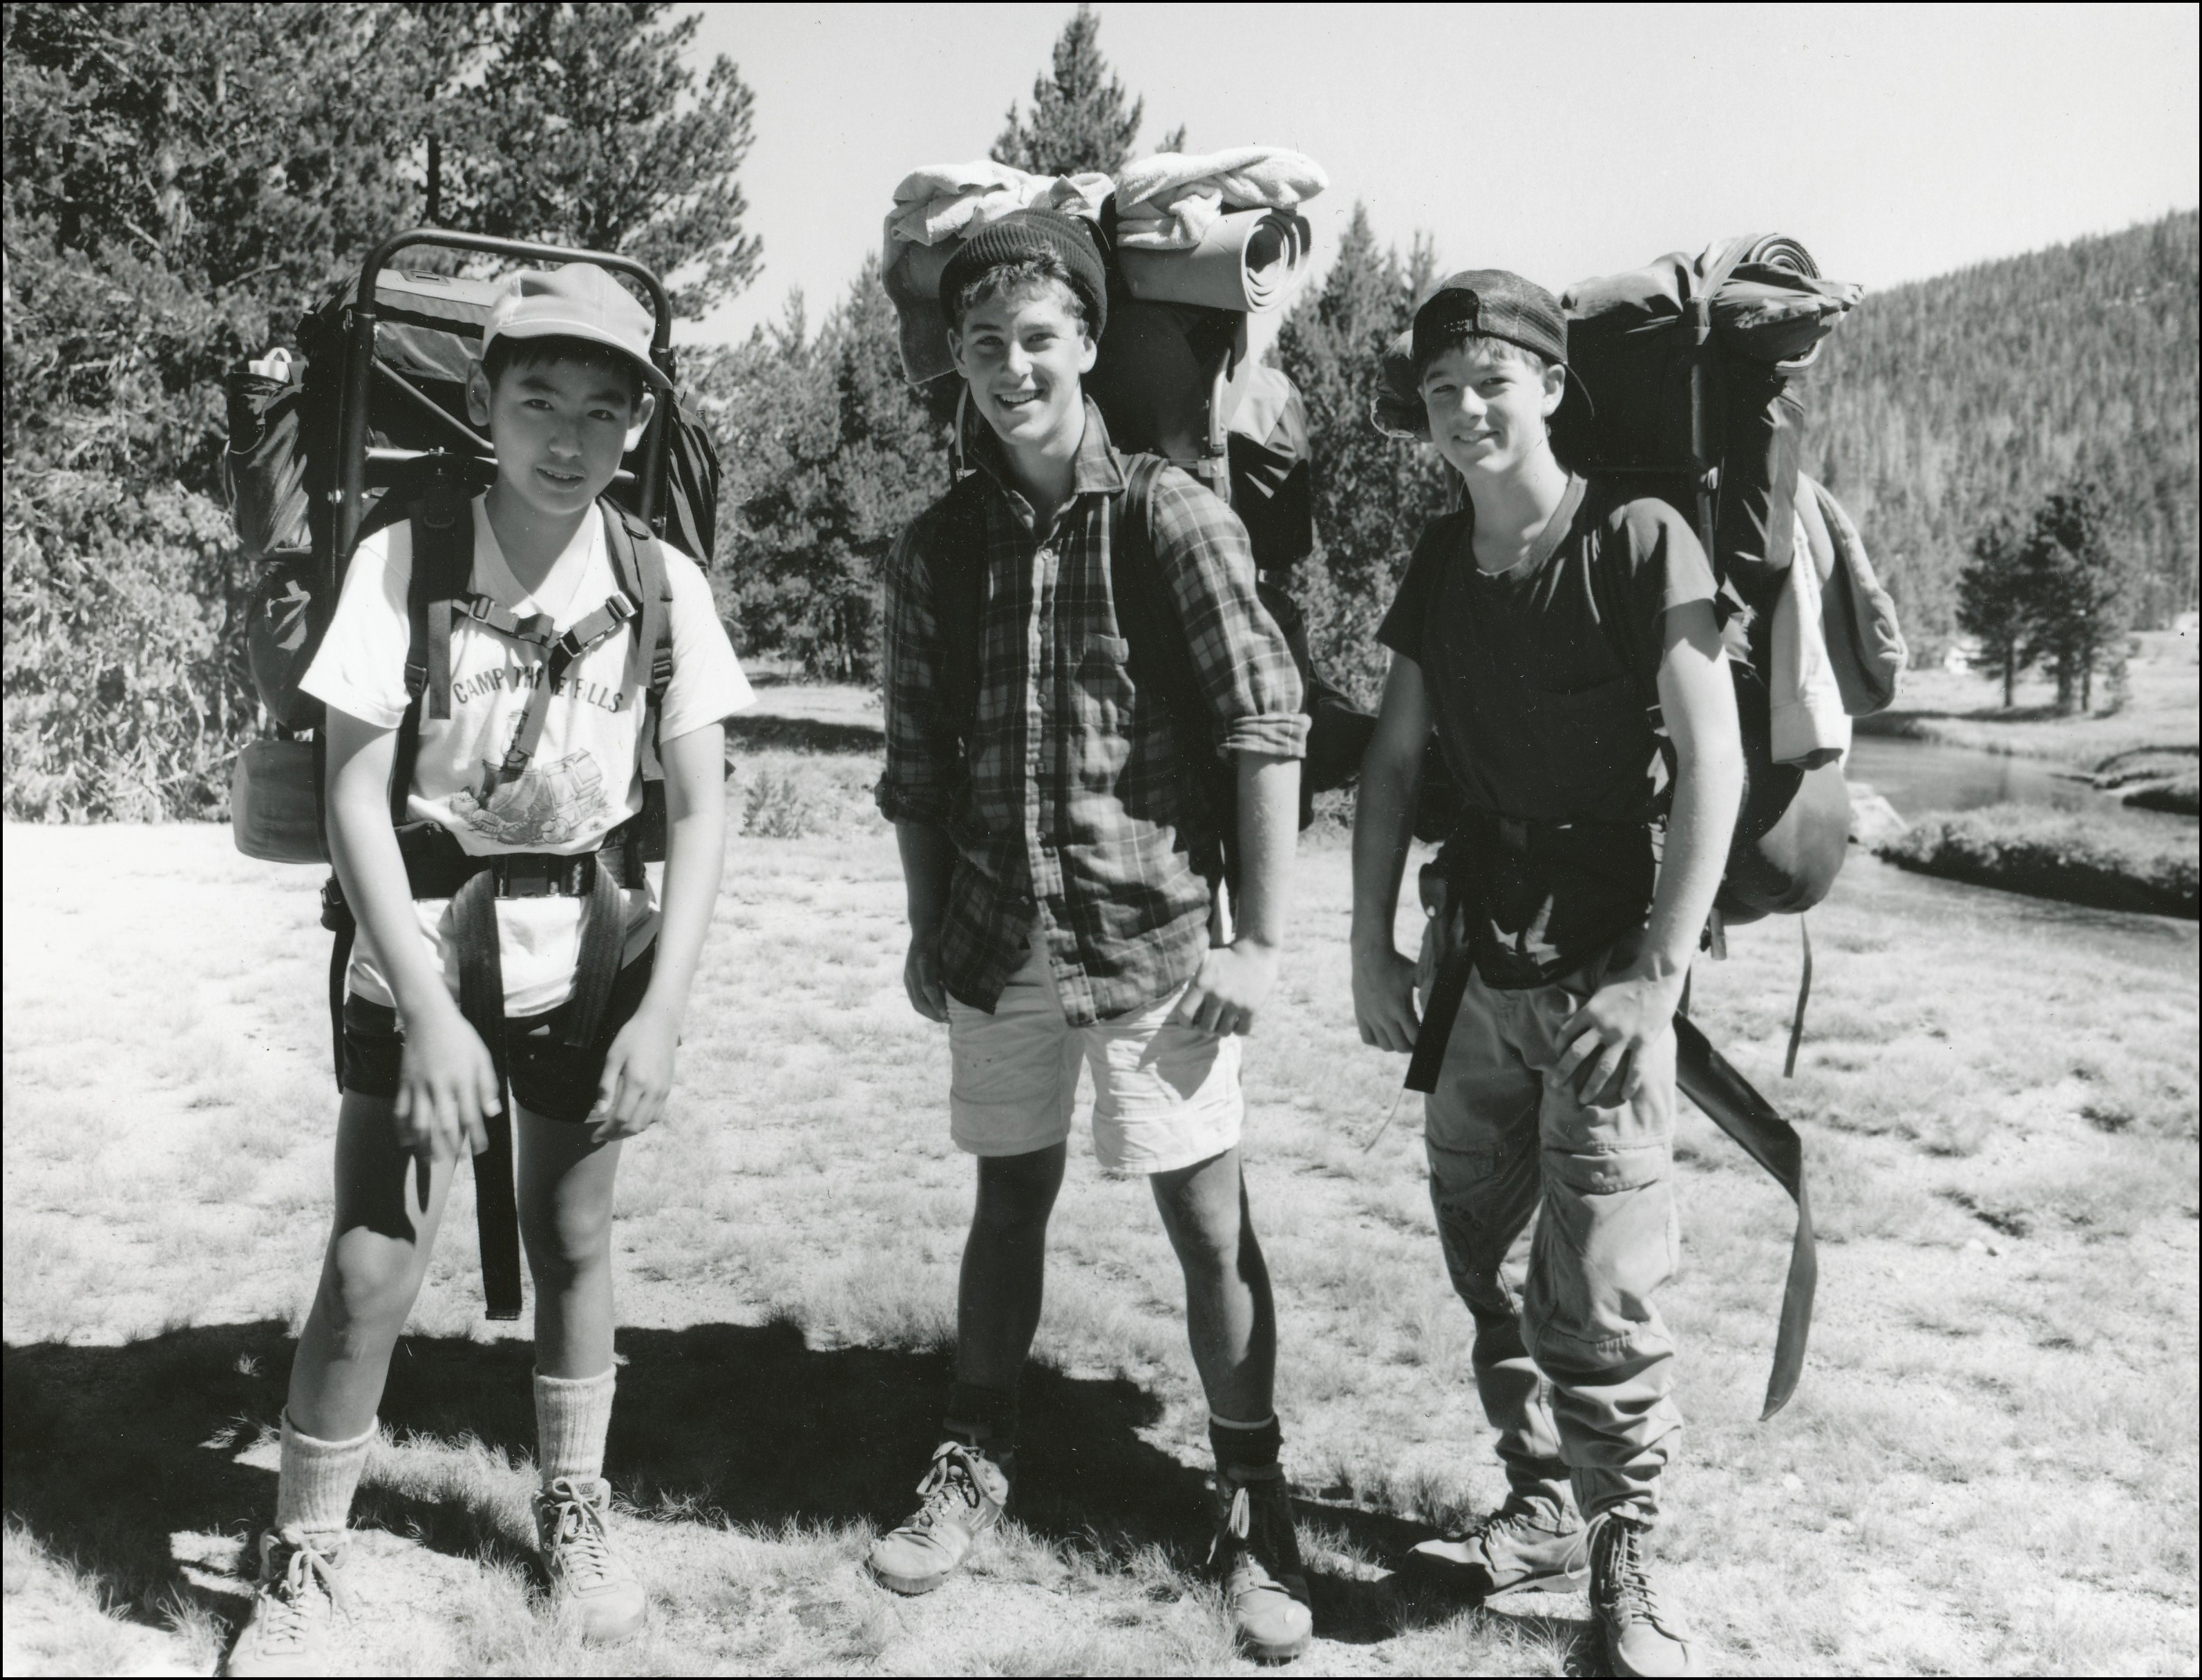 Three boy scouts posing in wilderness with large gear packs on their backs